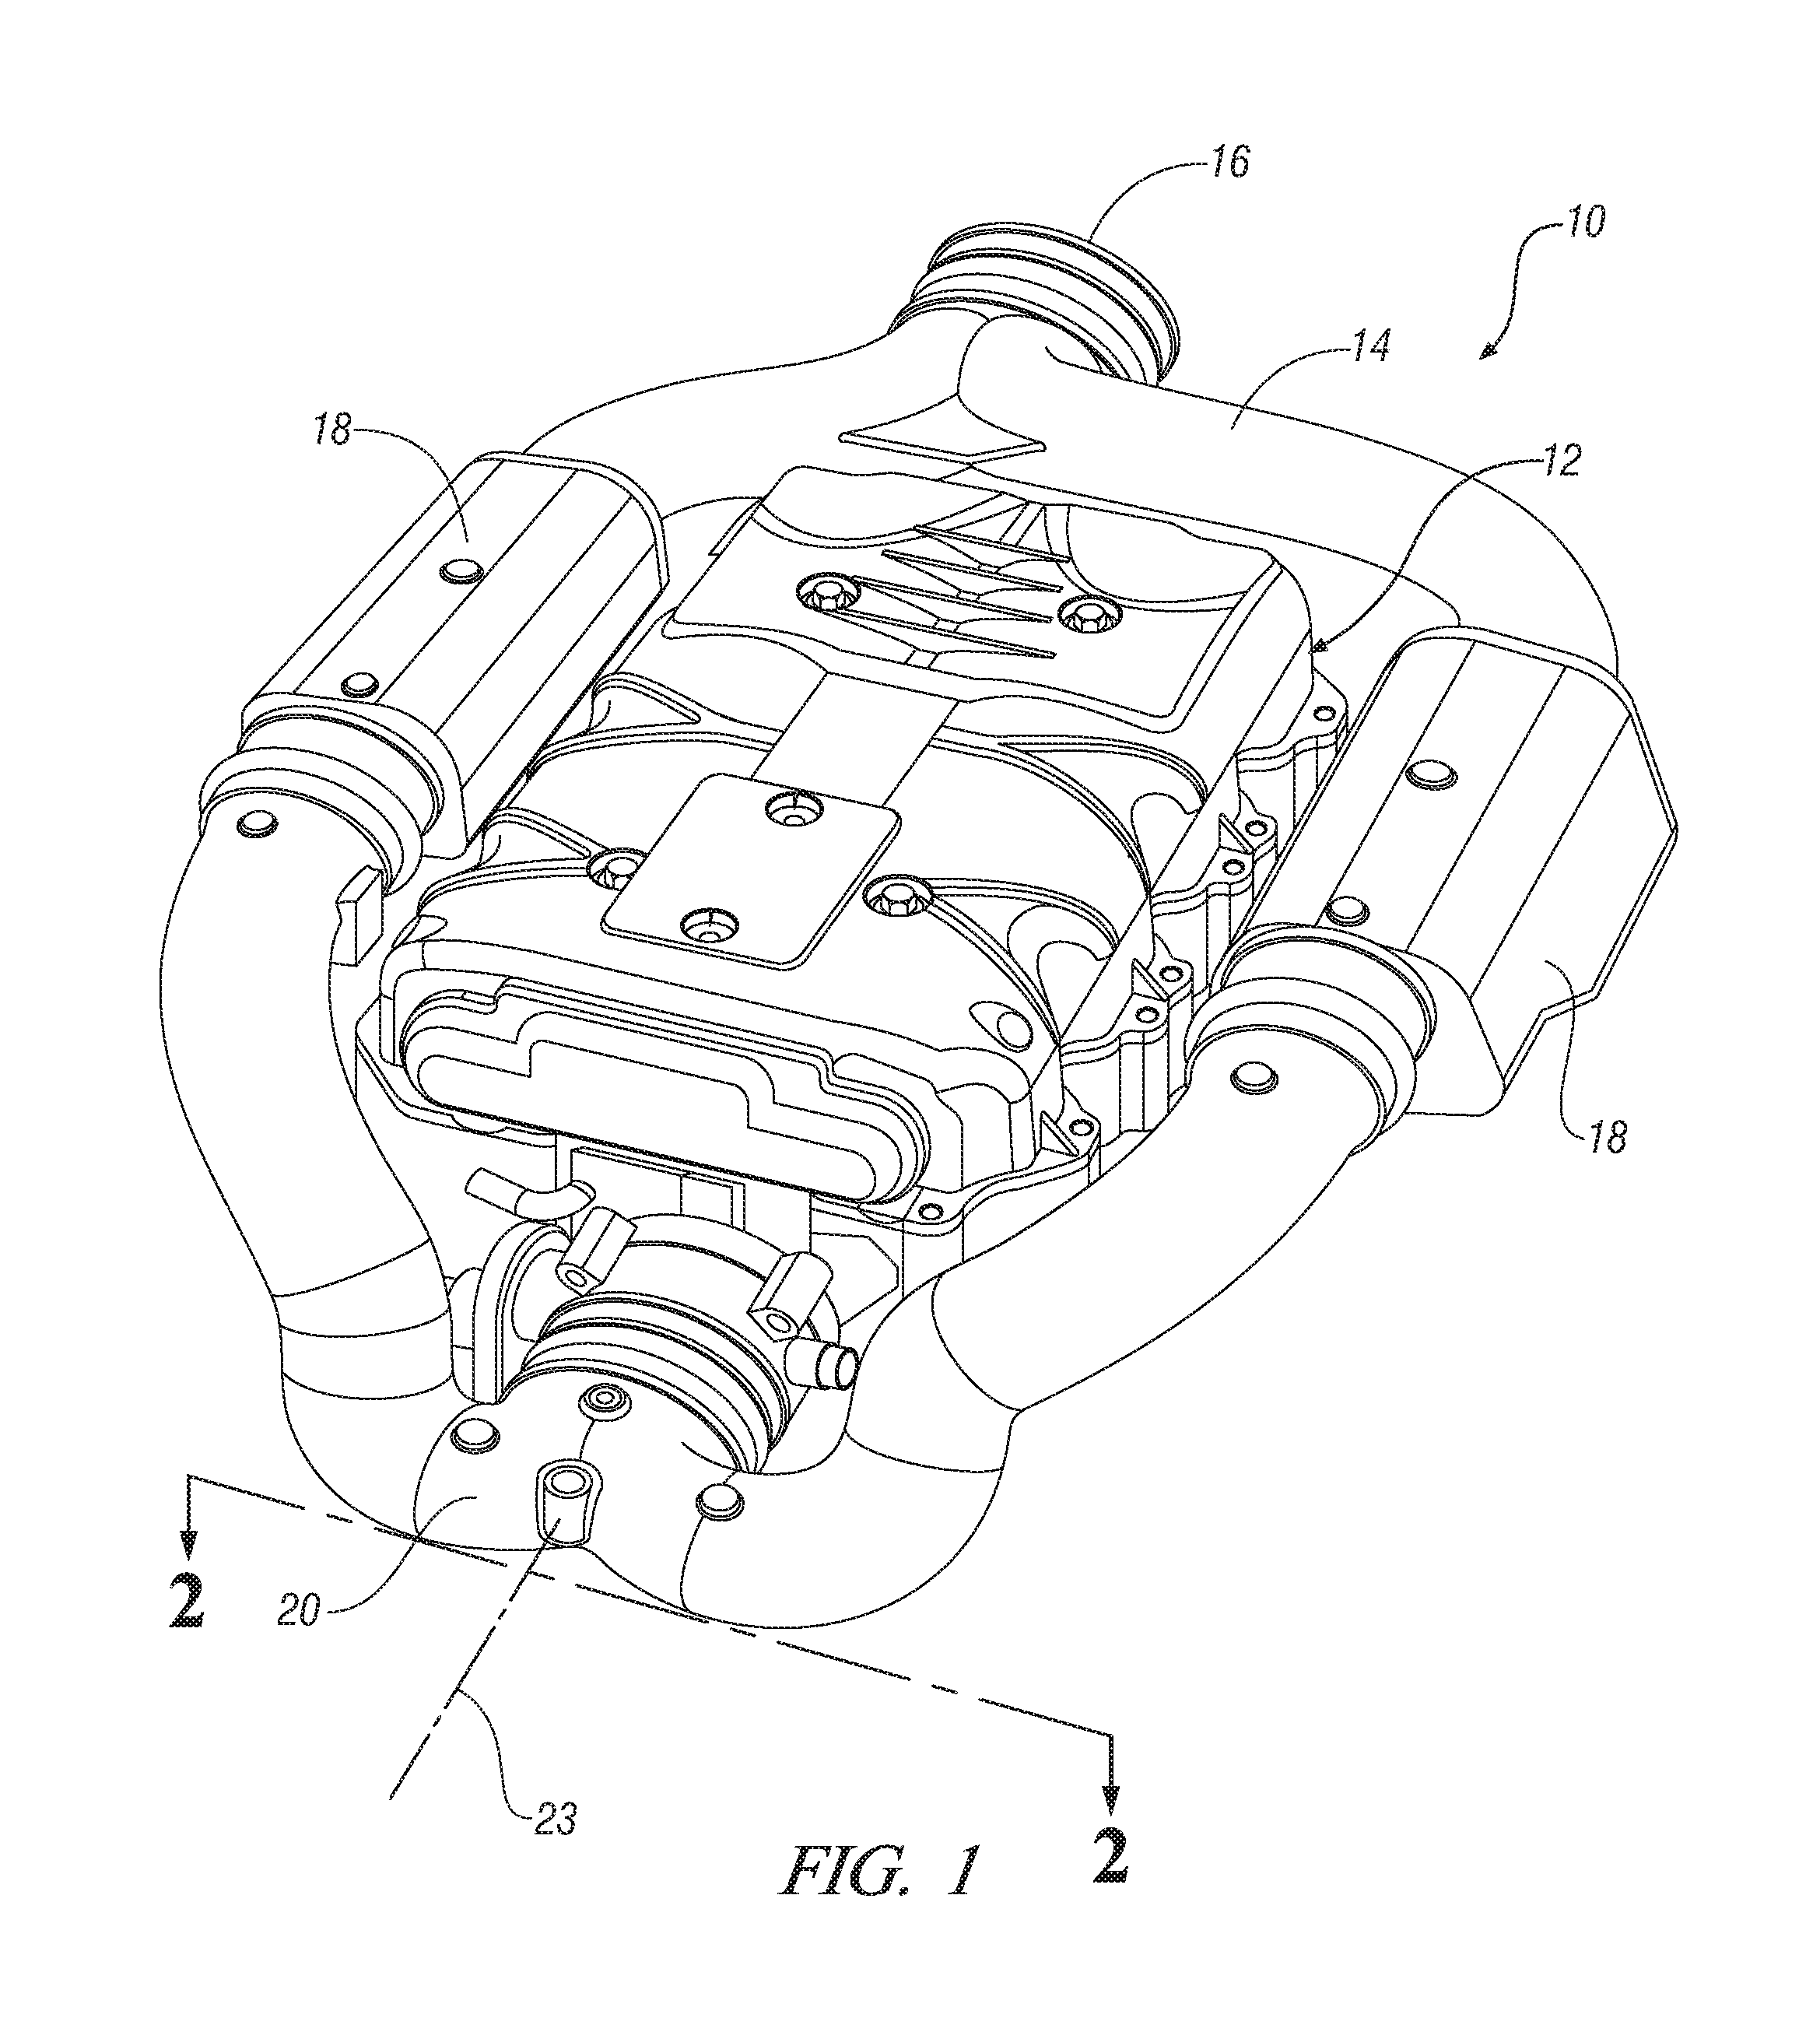 Engine air intake system with resilient coupling having internal noise attenuation tuning